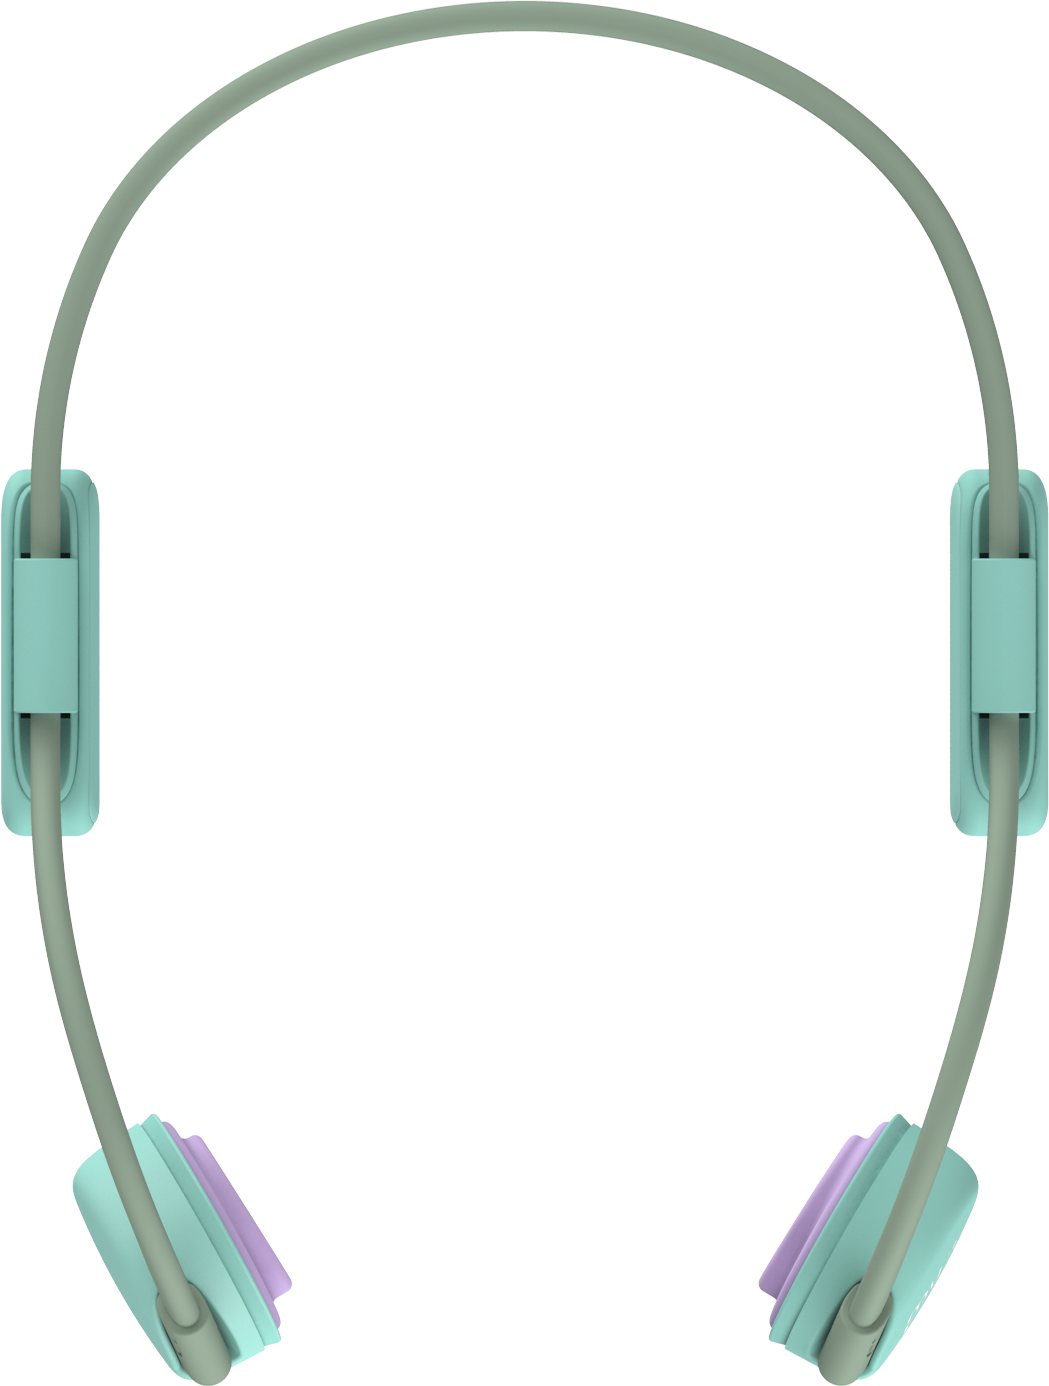 myFirst Headphones BC Wireless @ $110.95. Inclusive of delivery fees! - BYKidO